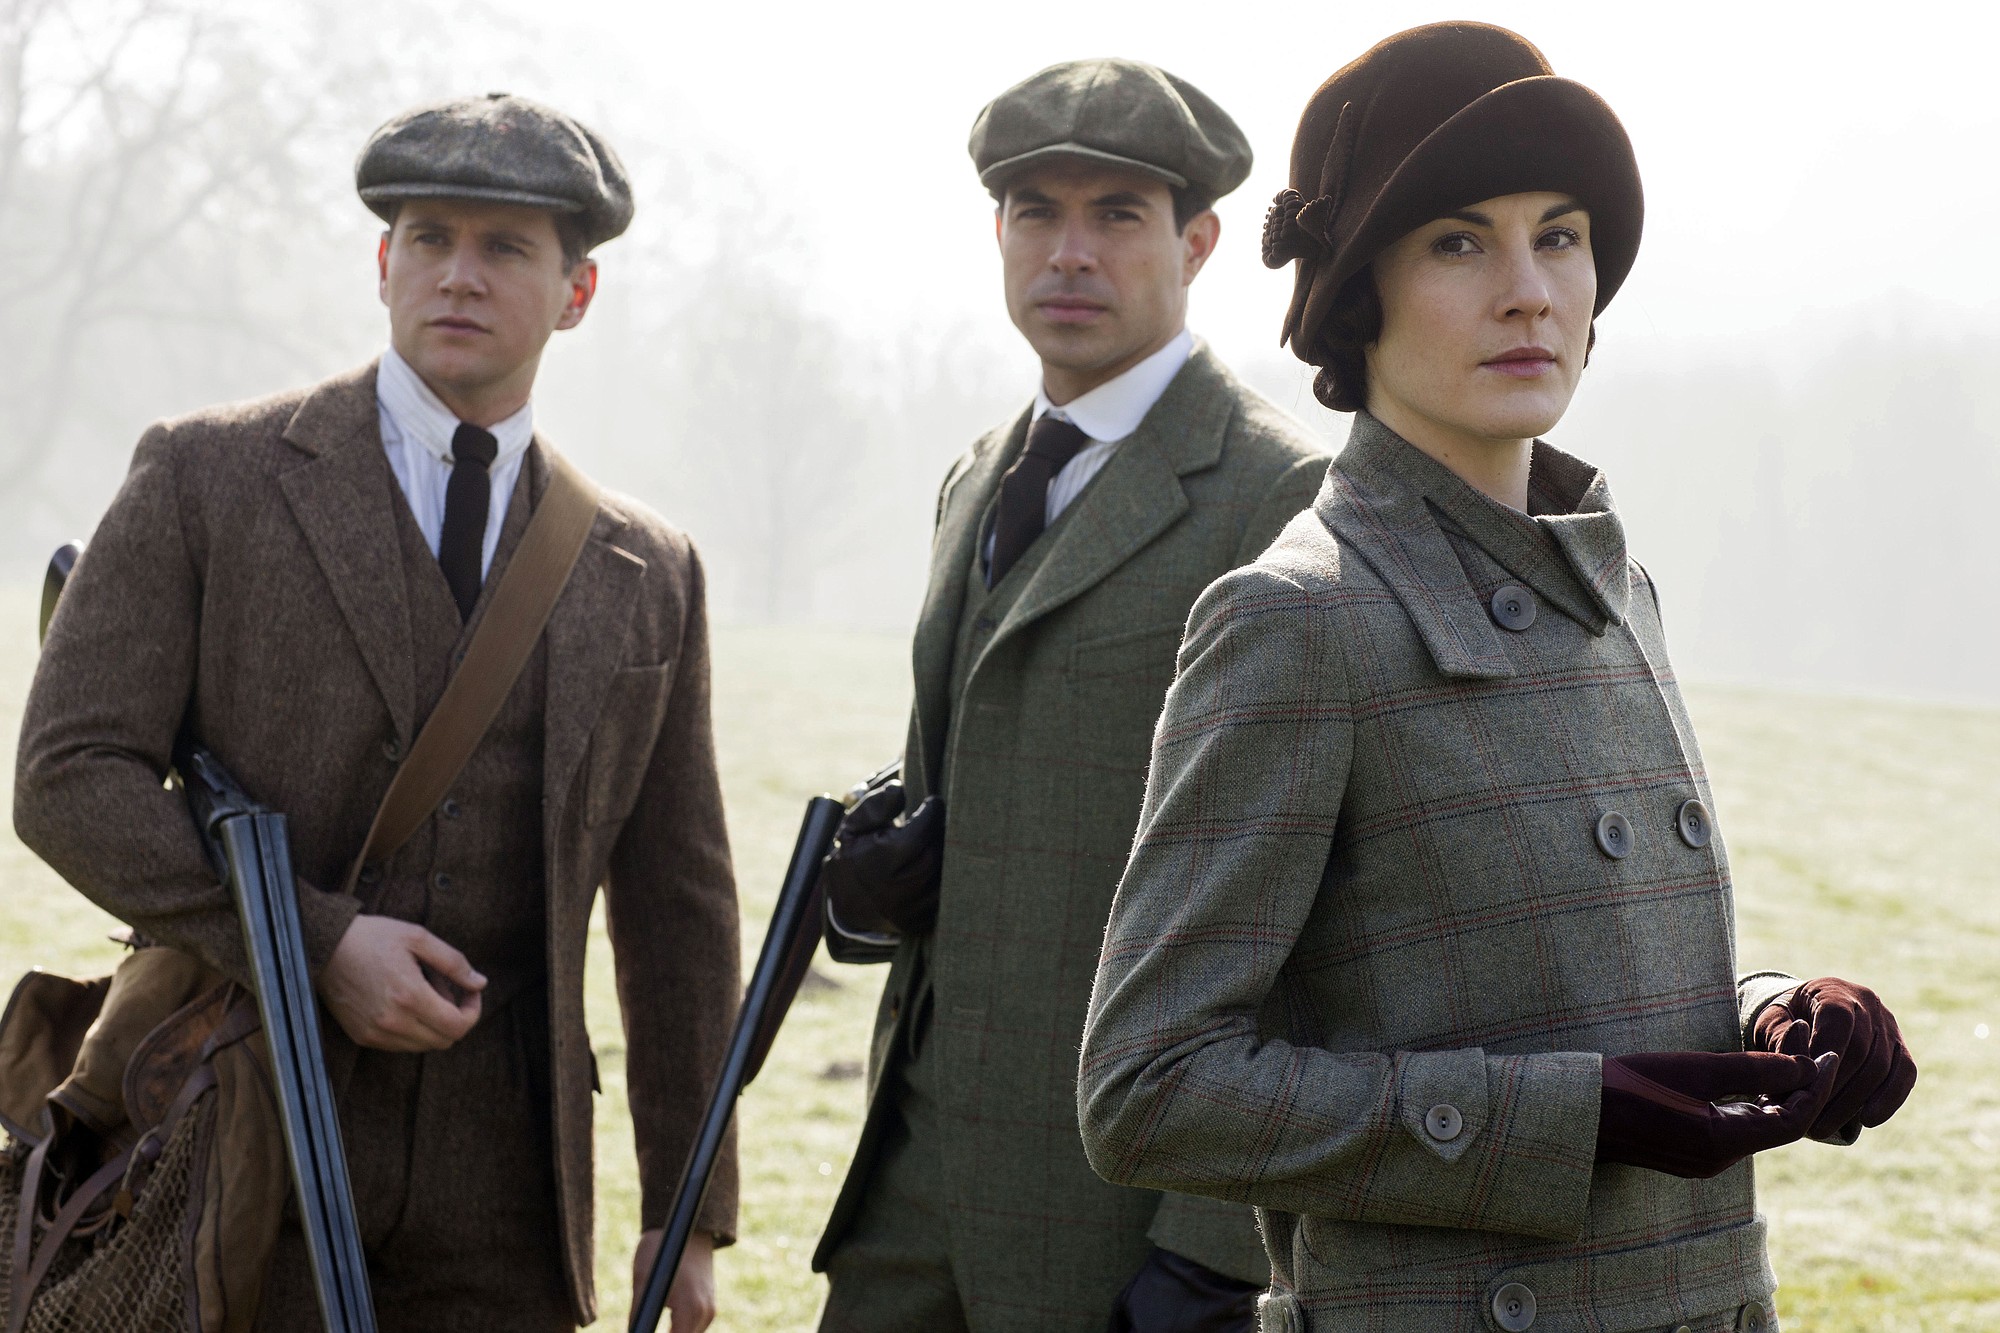 This photo provided by PBS/Masterpiece shows, from left, Allen Leech as Tom Branson, Tom Cullen as Lord Gillingham, and Michelle Dockery as Lady Mary, in a scene from season 5 of &quot;Downton Abbey.&quot; The show premieres Sunday, Jan.